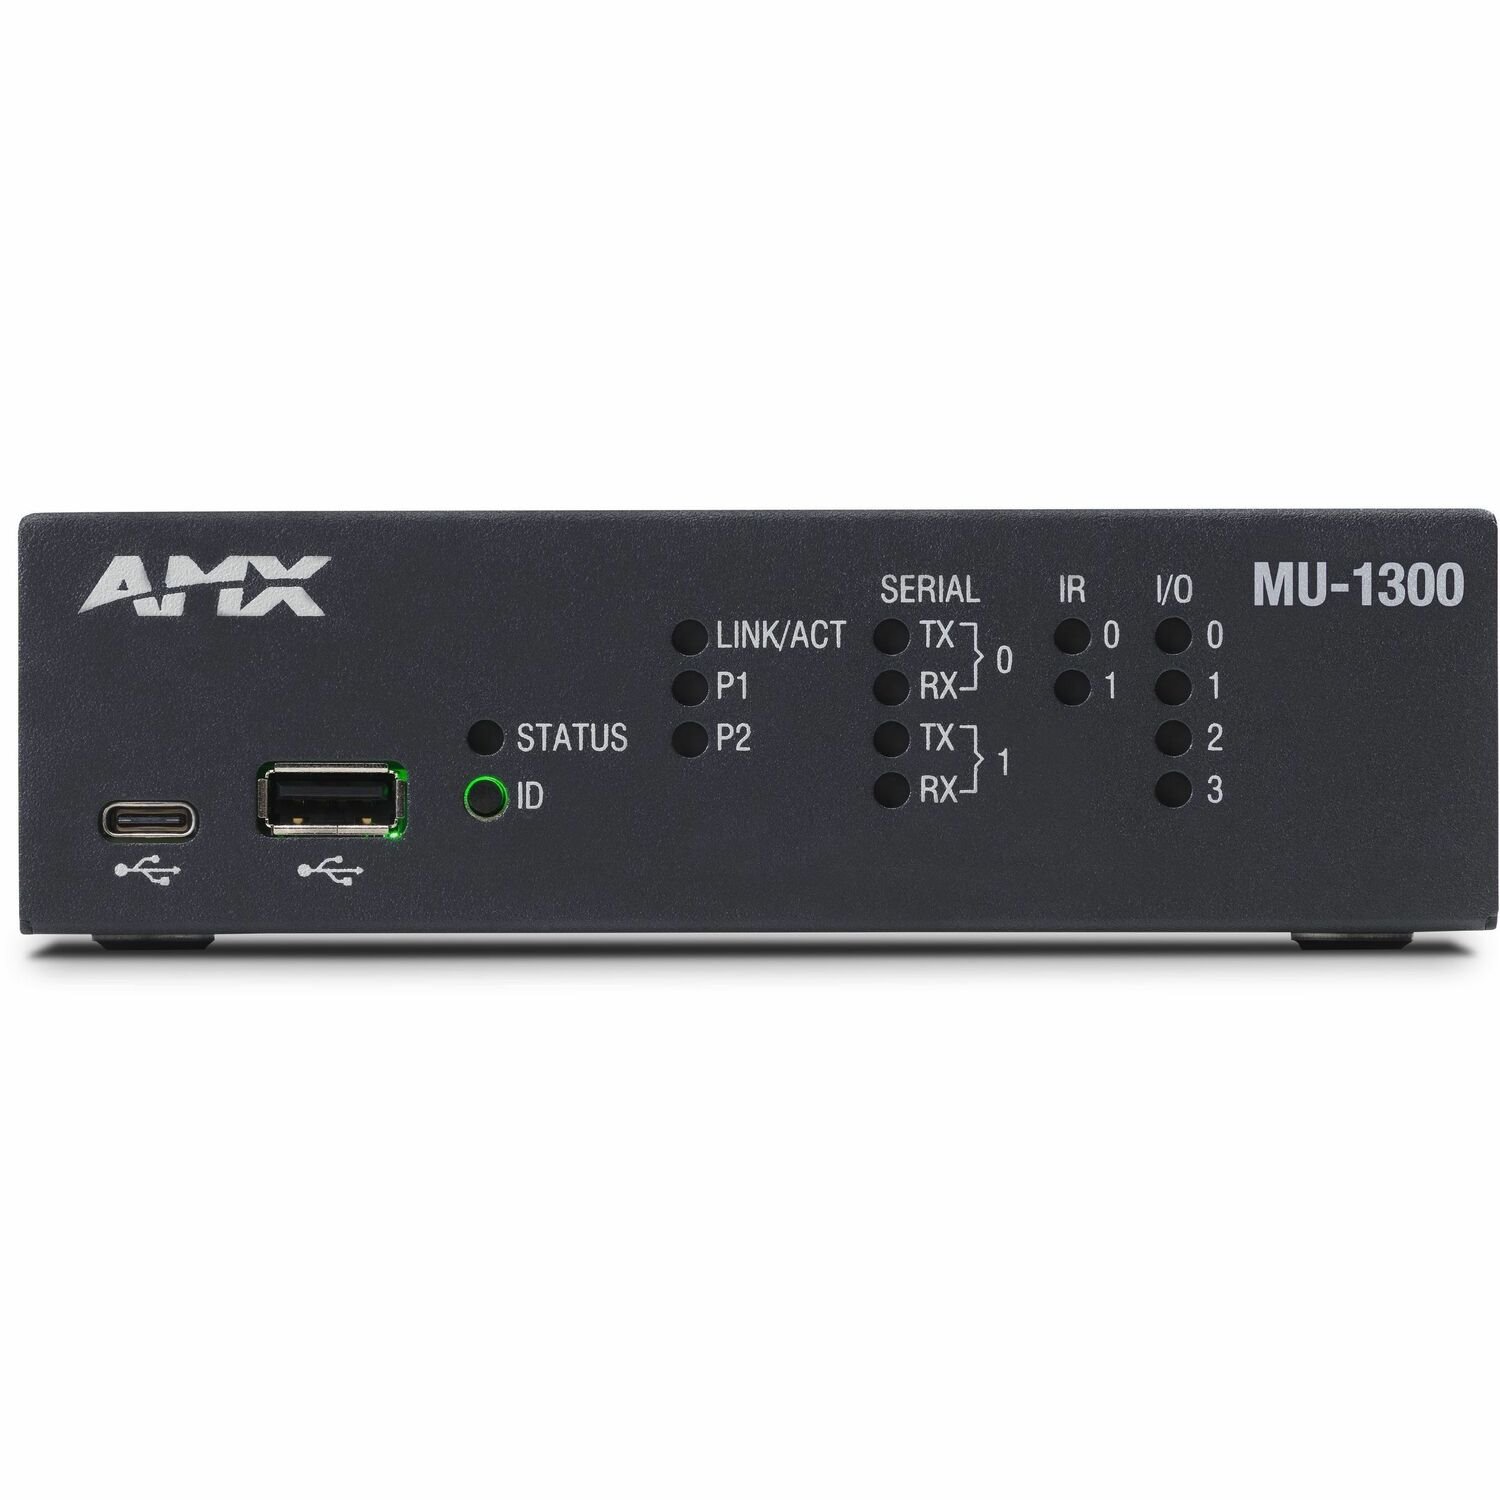 AMX MUSE Controller with 2 Serial, 2 IR, 4 IO